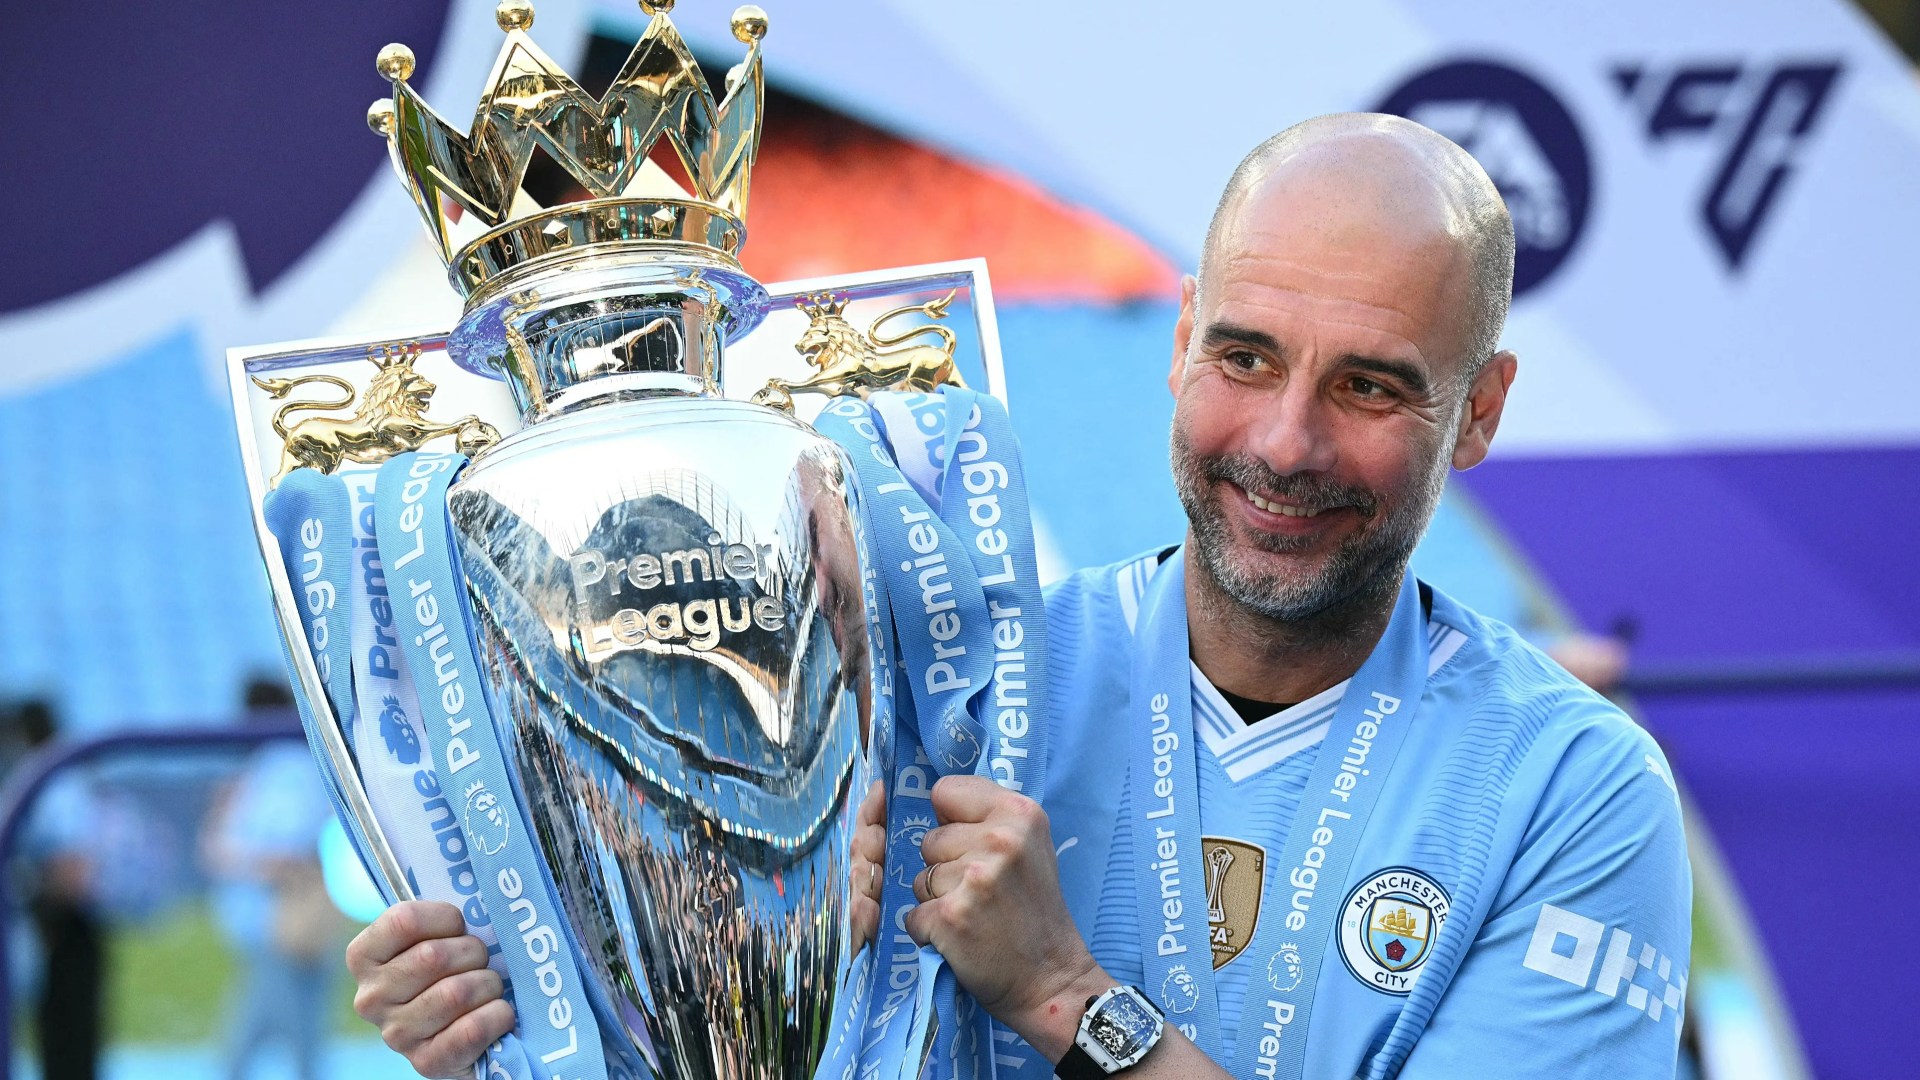 Pep Guardiola drops Man City bombshell moments after winning title as he reveals ‘I’m closer to leaving than staying’ [Video]